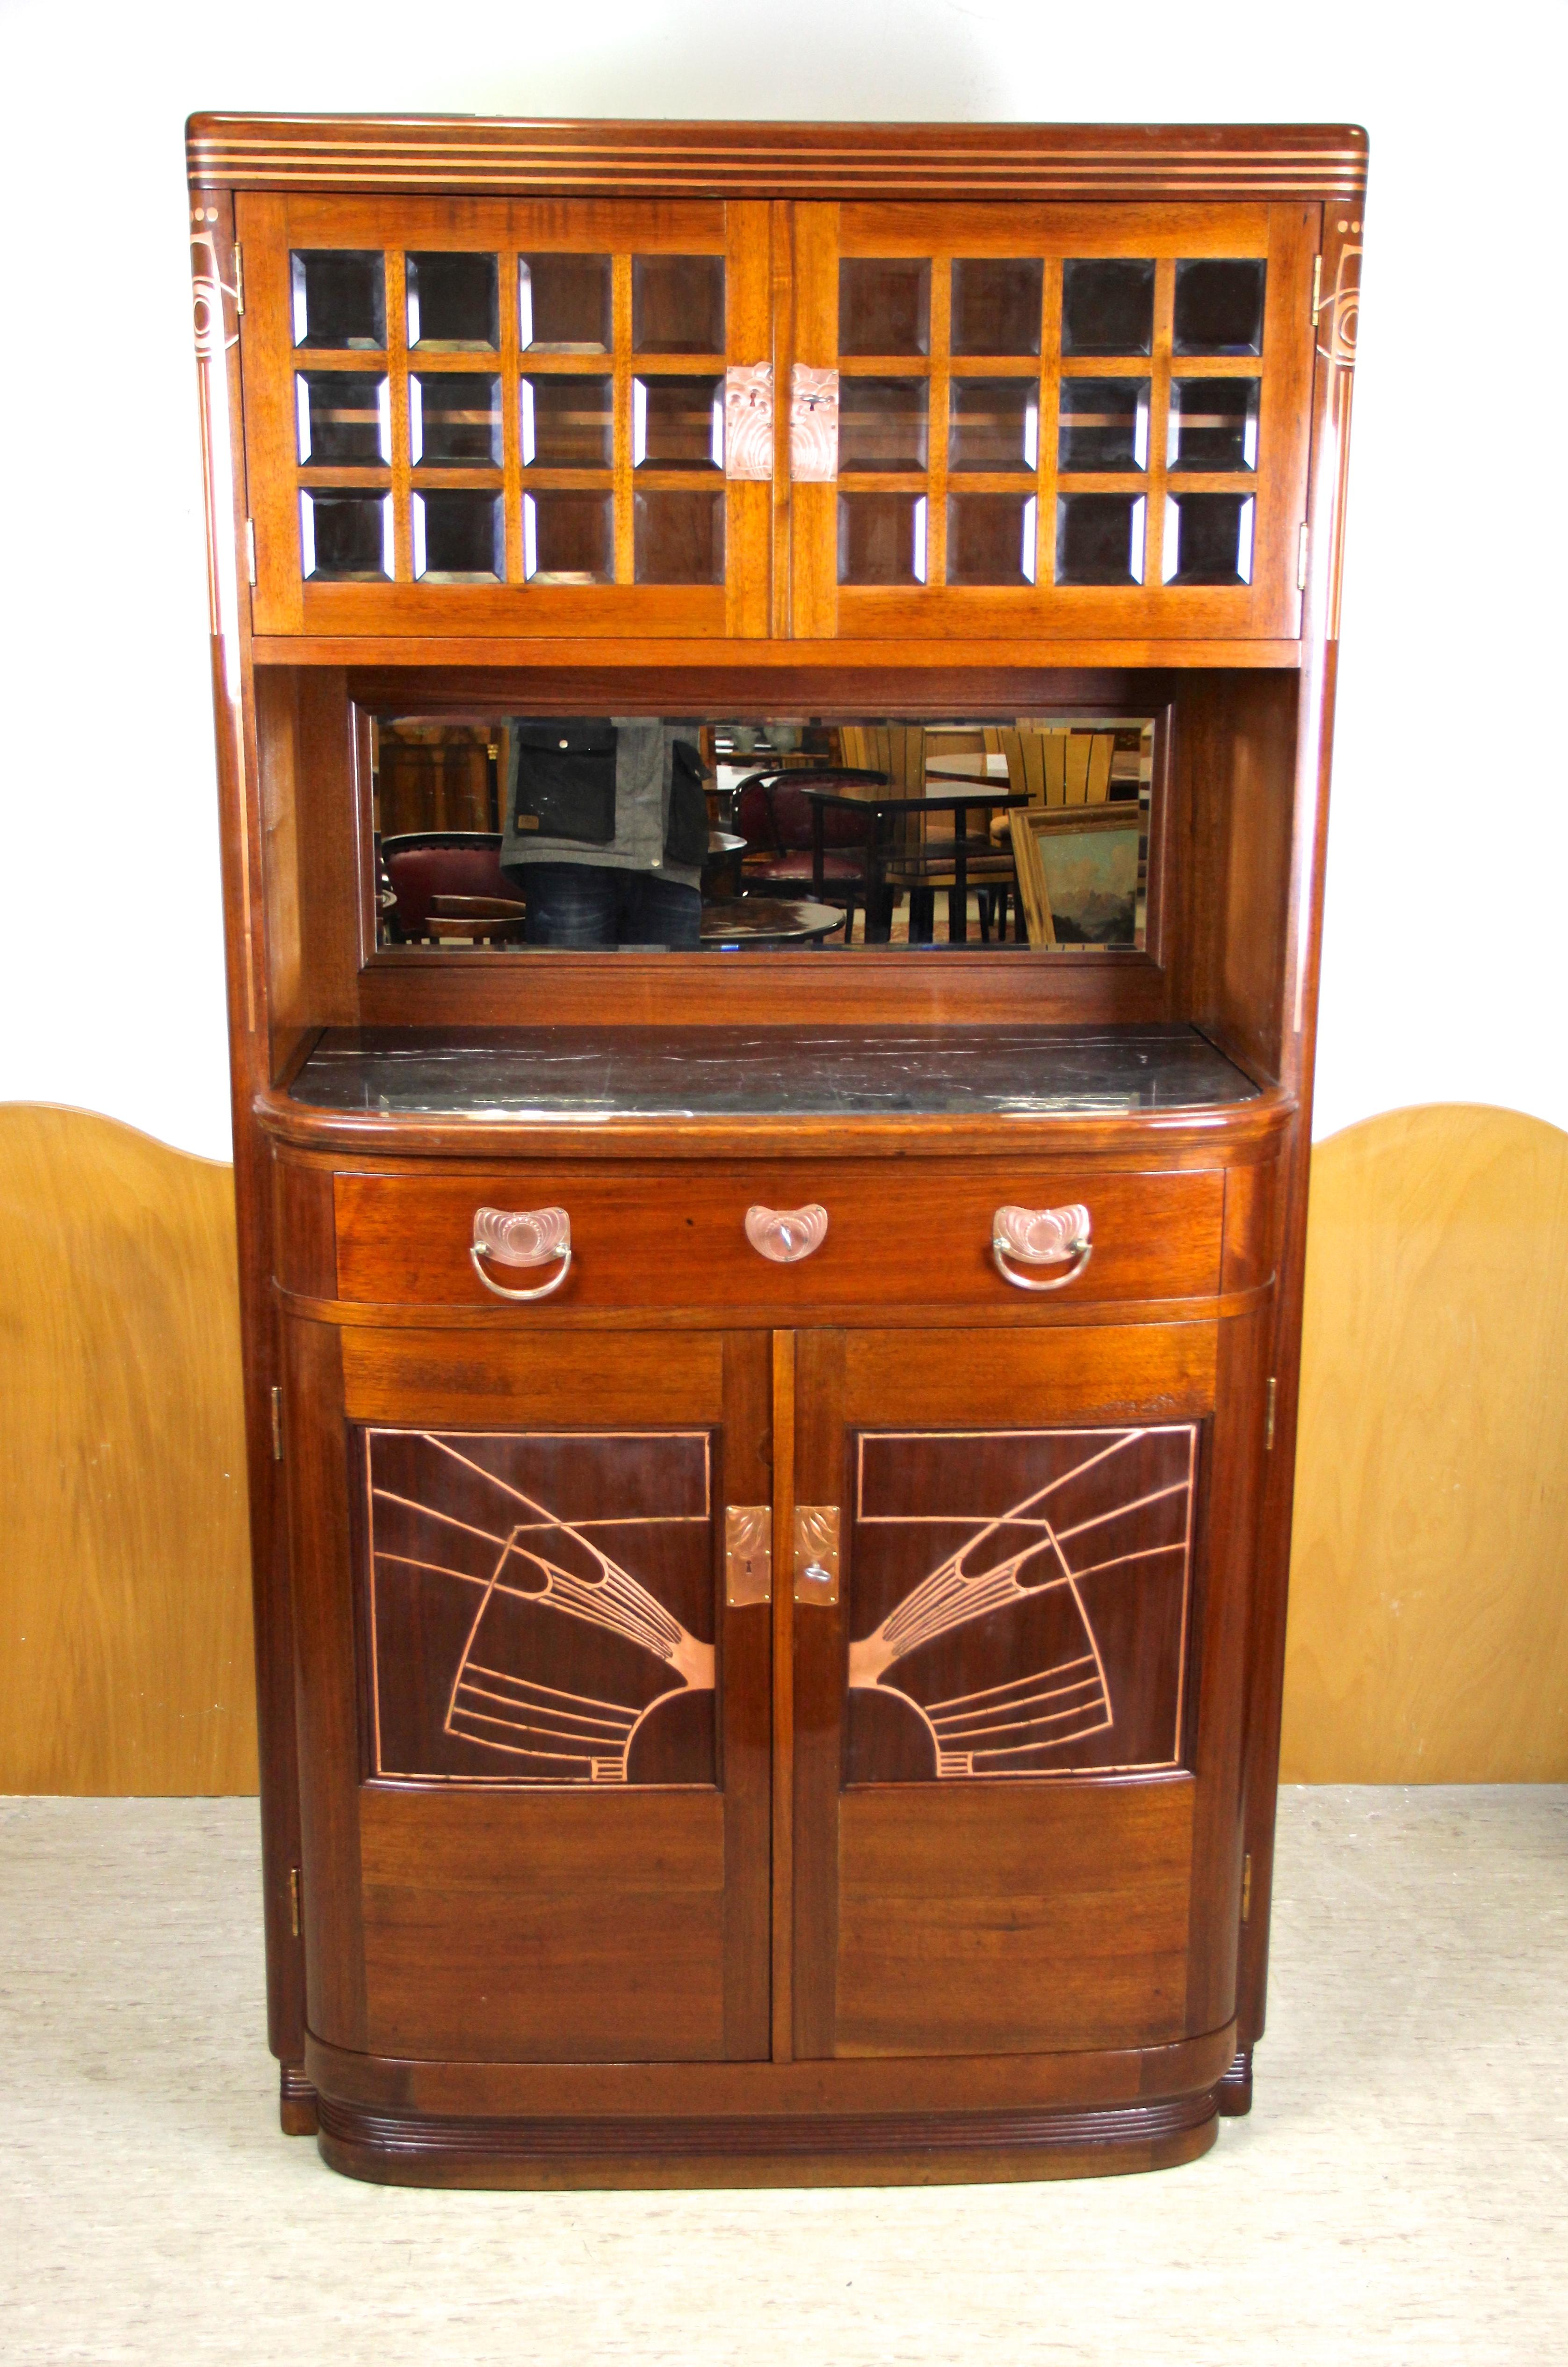 Mesmerizing Art Nouveau cabinet or buffet by August Ungethüm from Austria, circa 1900. Designed and produced by the famous art furniture factory of A. Ungethüm in Vienna, the fine mahogany buffet stands out with a very unique design. The upper part